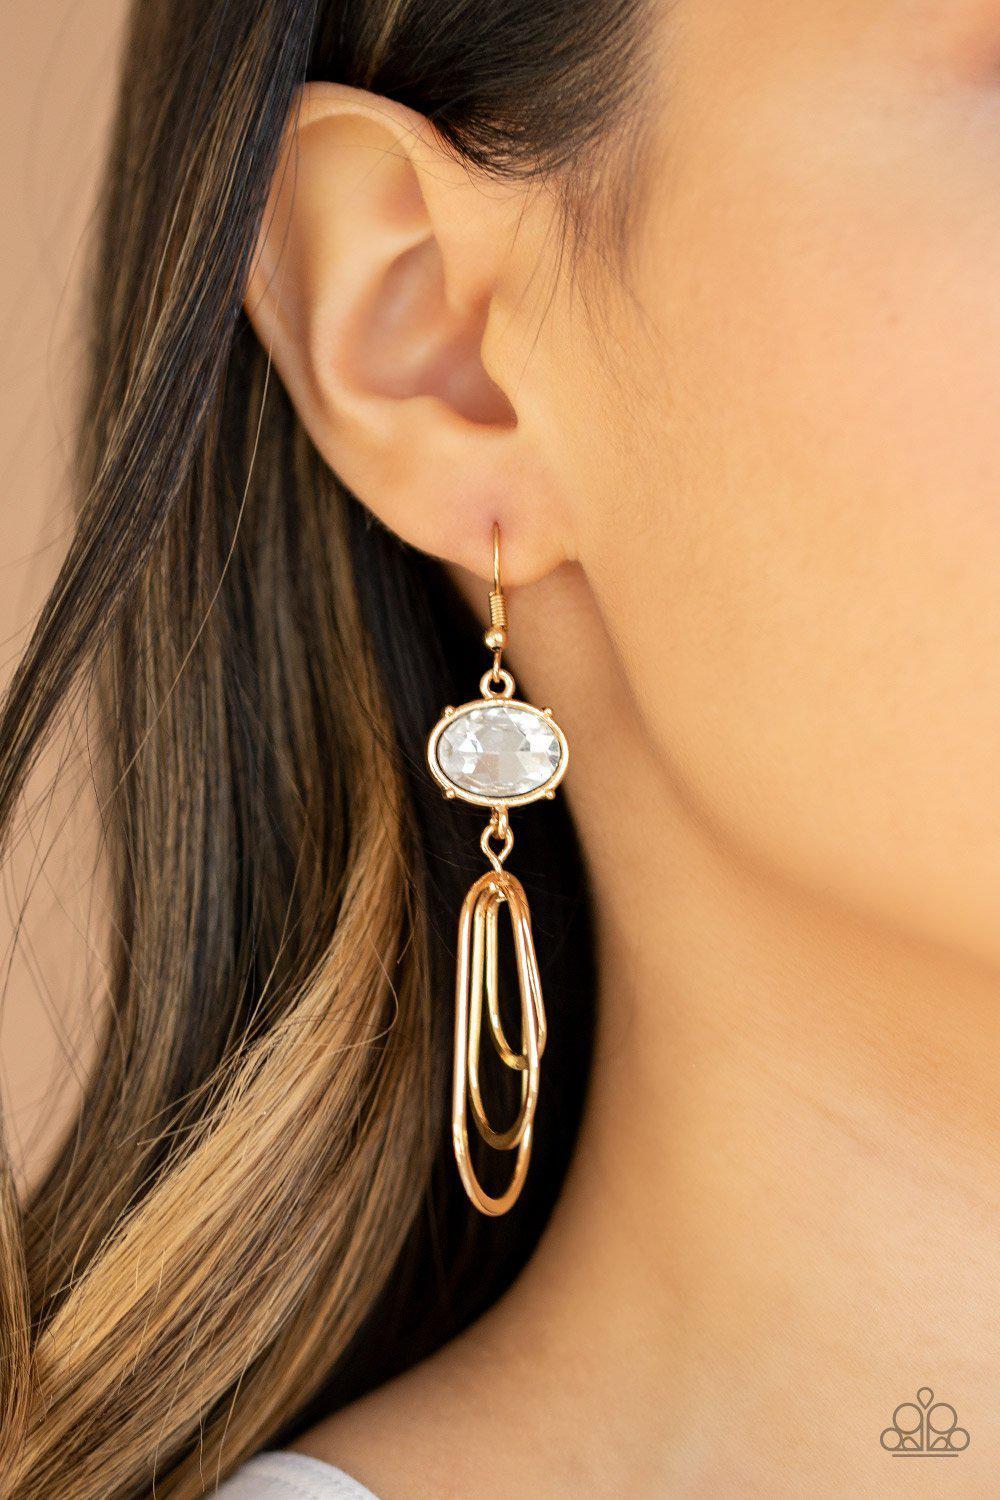 Drop-Dead Glamorous Gold and White Rhinestone Earrings - Paparazzi Accessories - model -CarasShop.com - $5 Jewelry by Cara Jewels